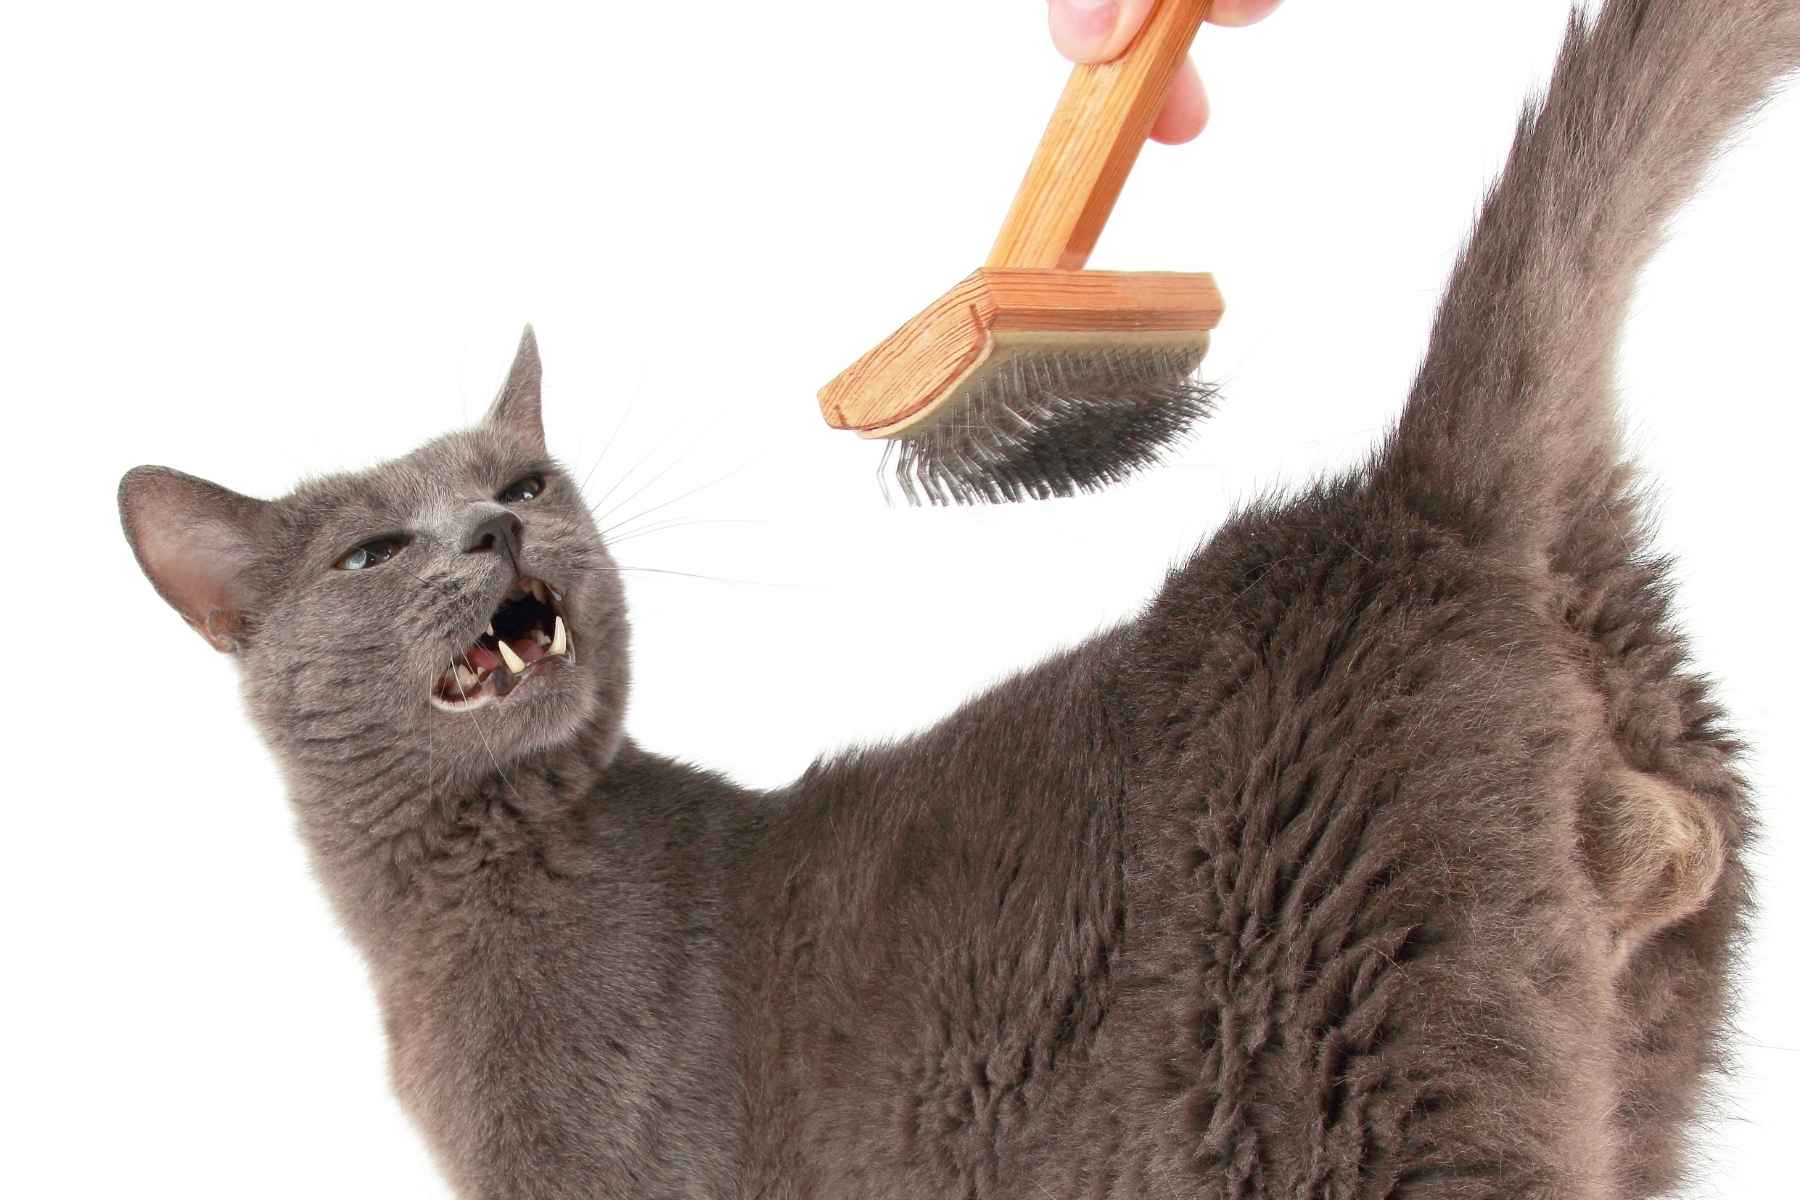 A disgusted gray cat and a comb